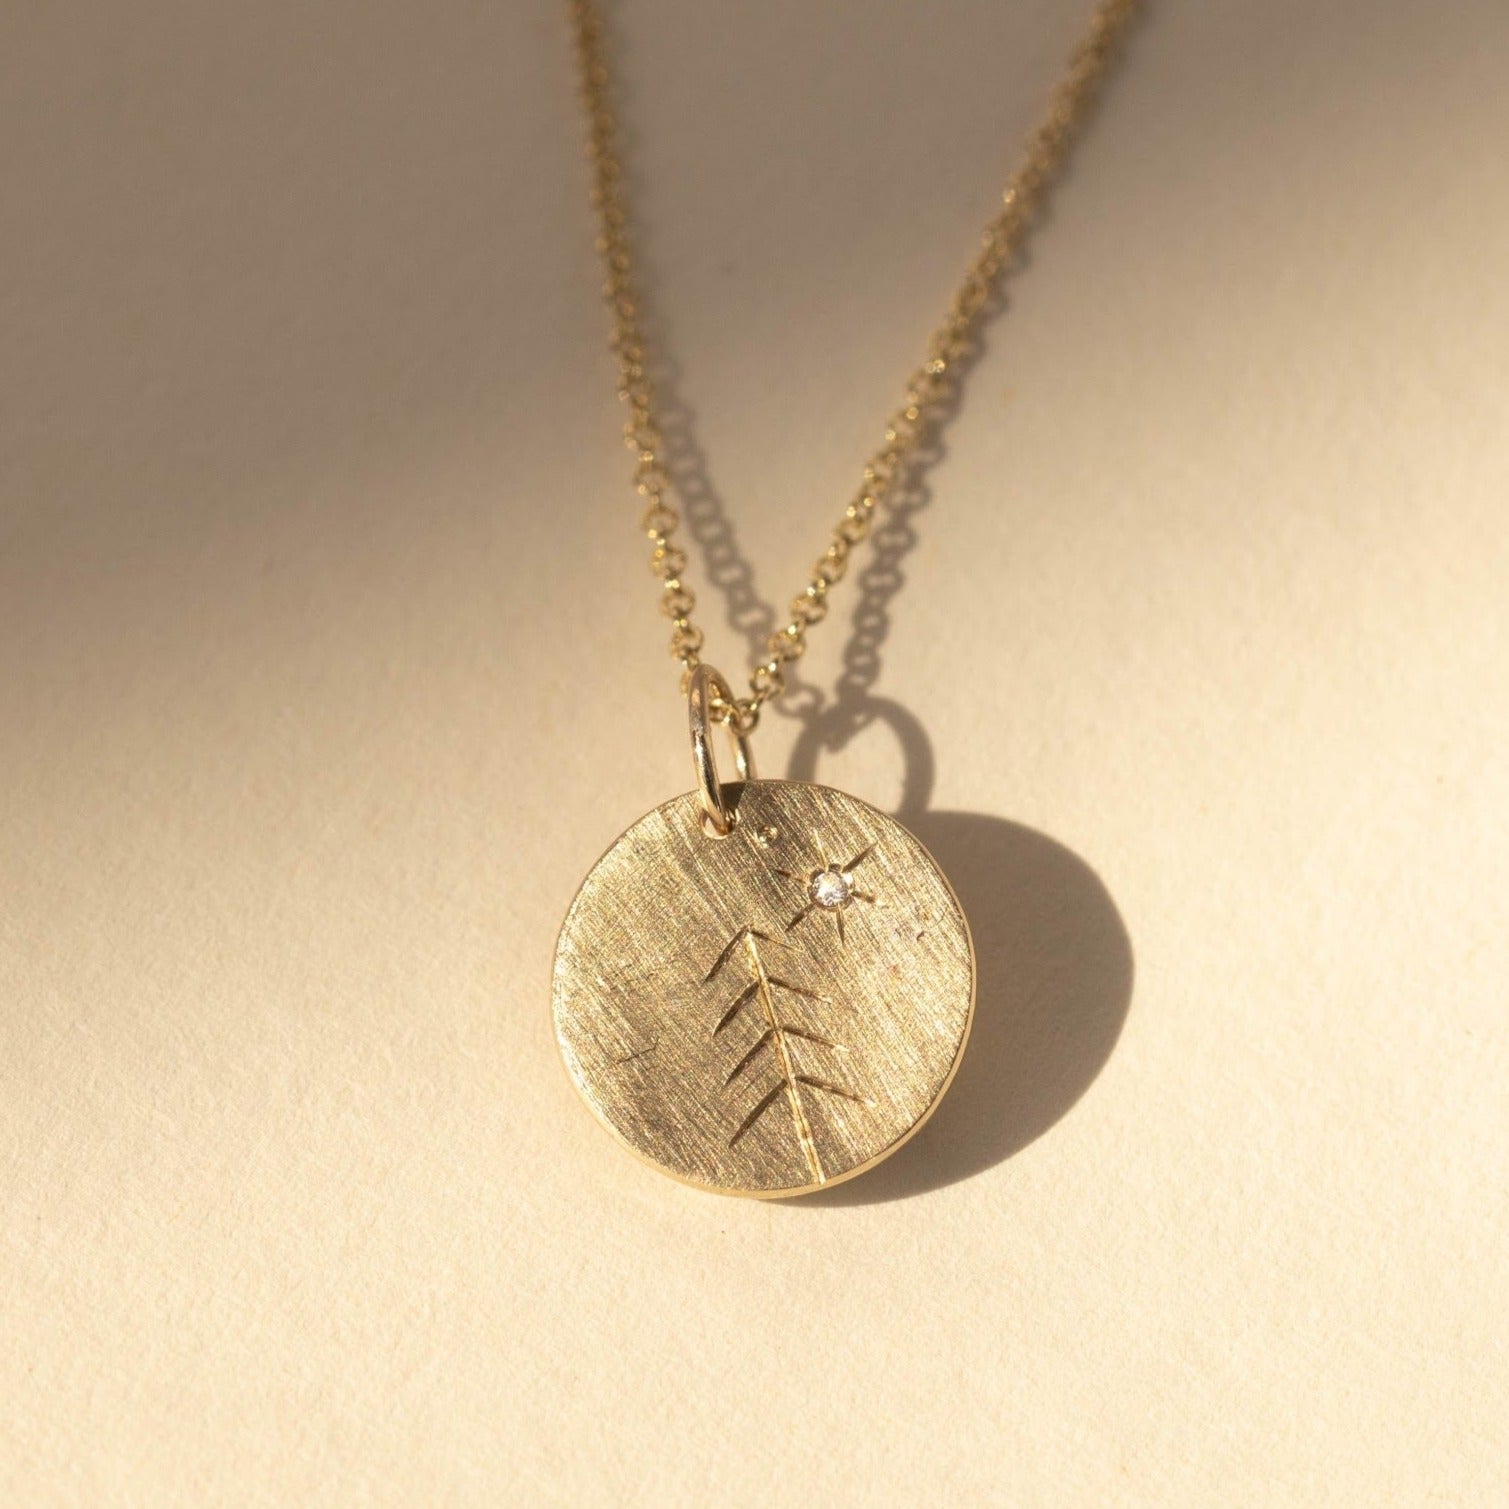 14k yellow gold GREE etched tree charm